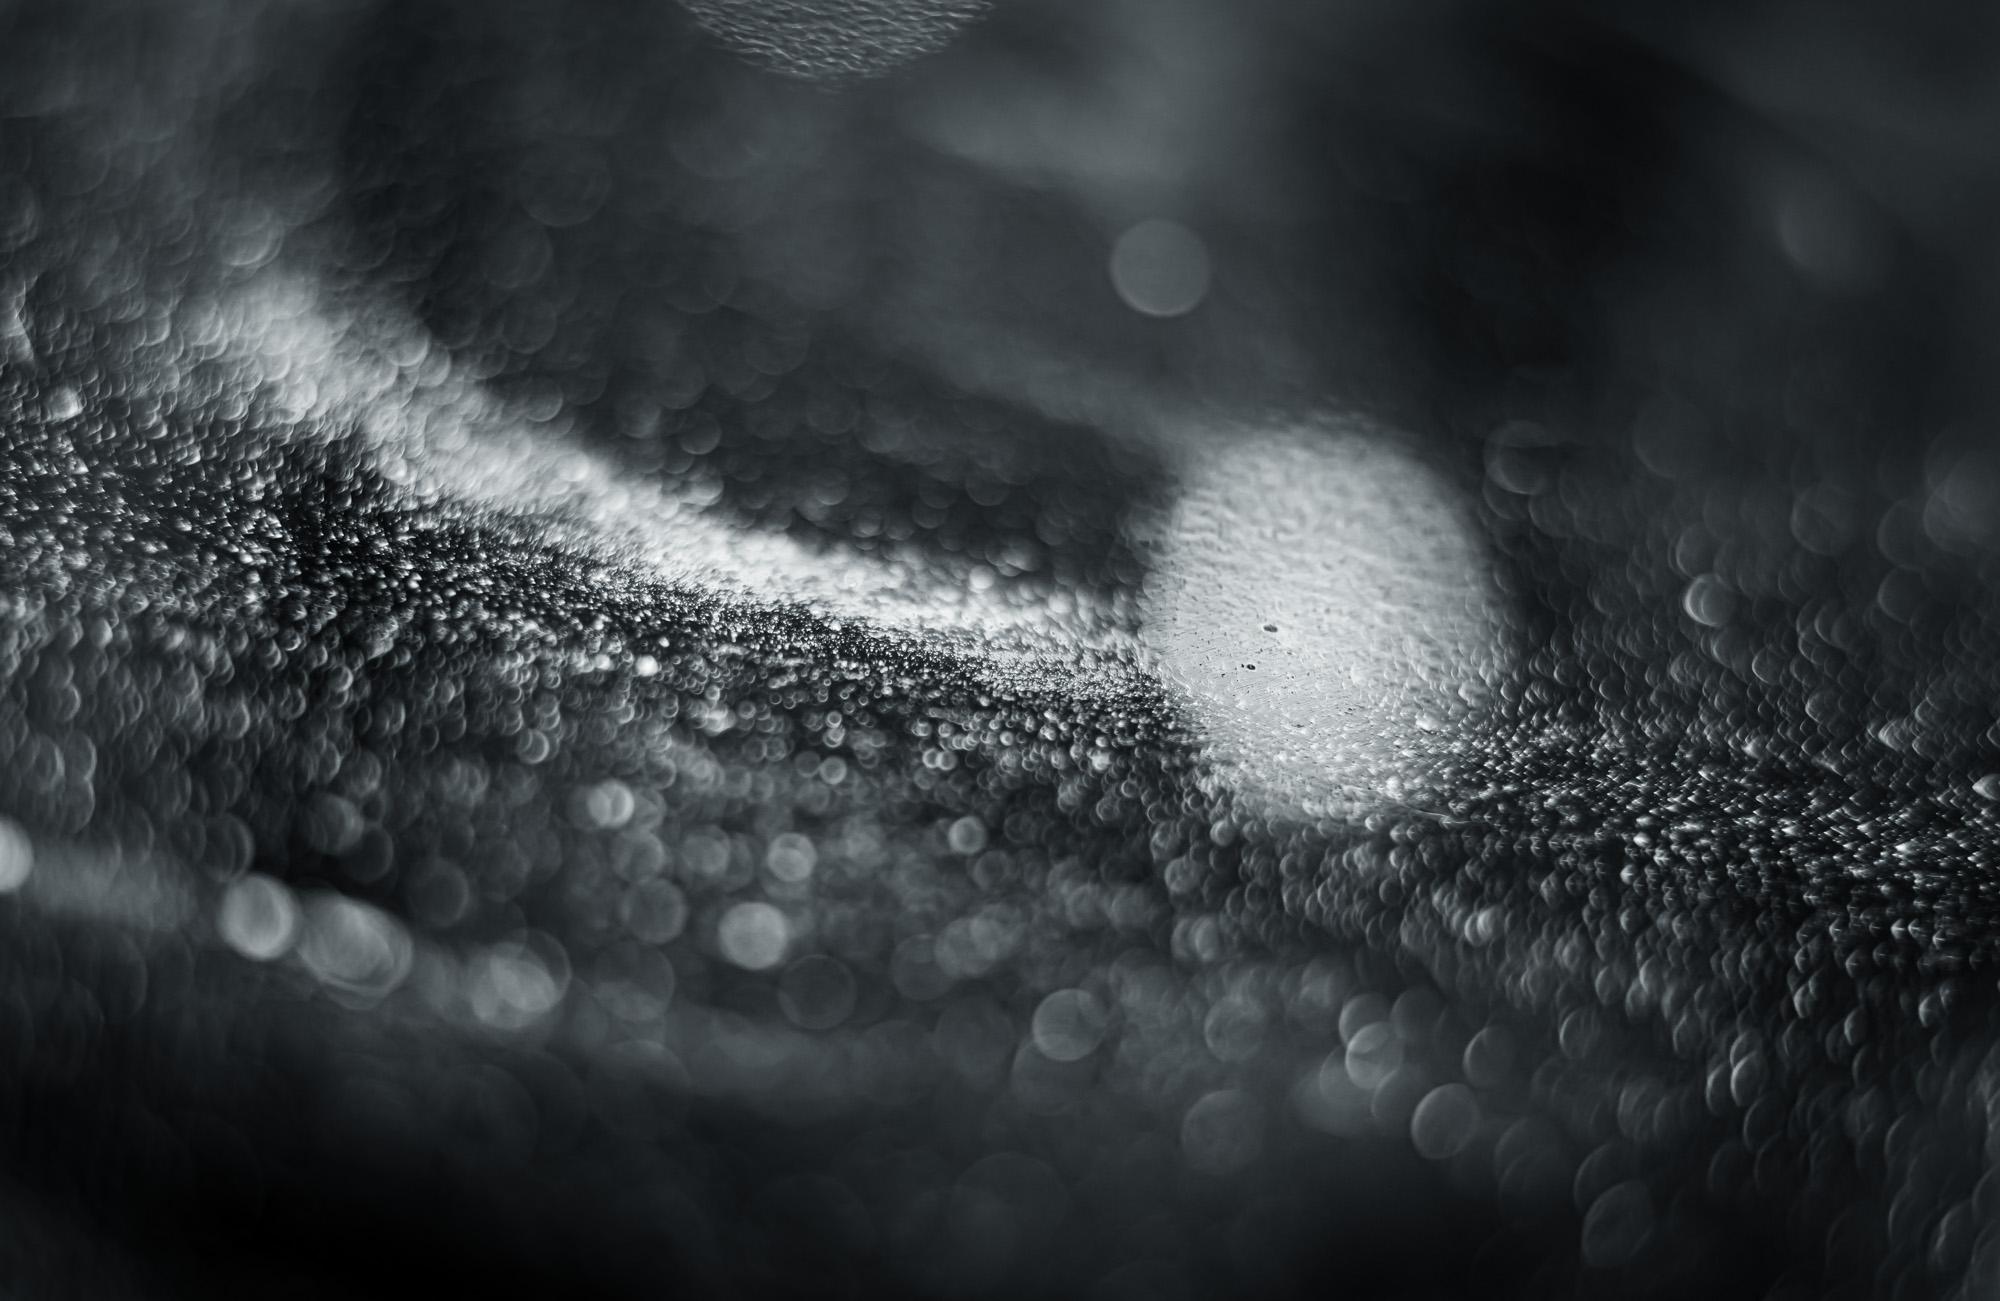 This is Untitled #28 from the Nature of Particles series.

The Nature of Particles series consists of abstract photographs of ordinary particulates, that we observe in our everyday surroundings as floating fragments seen in shafts of light.

My